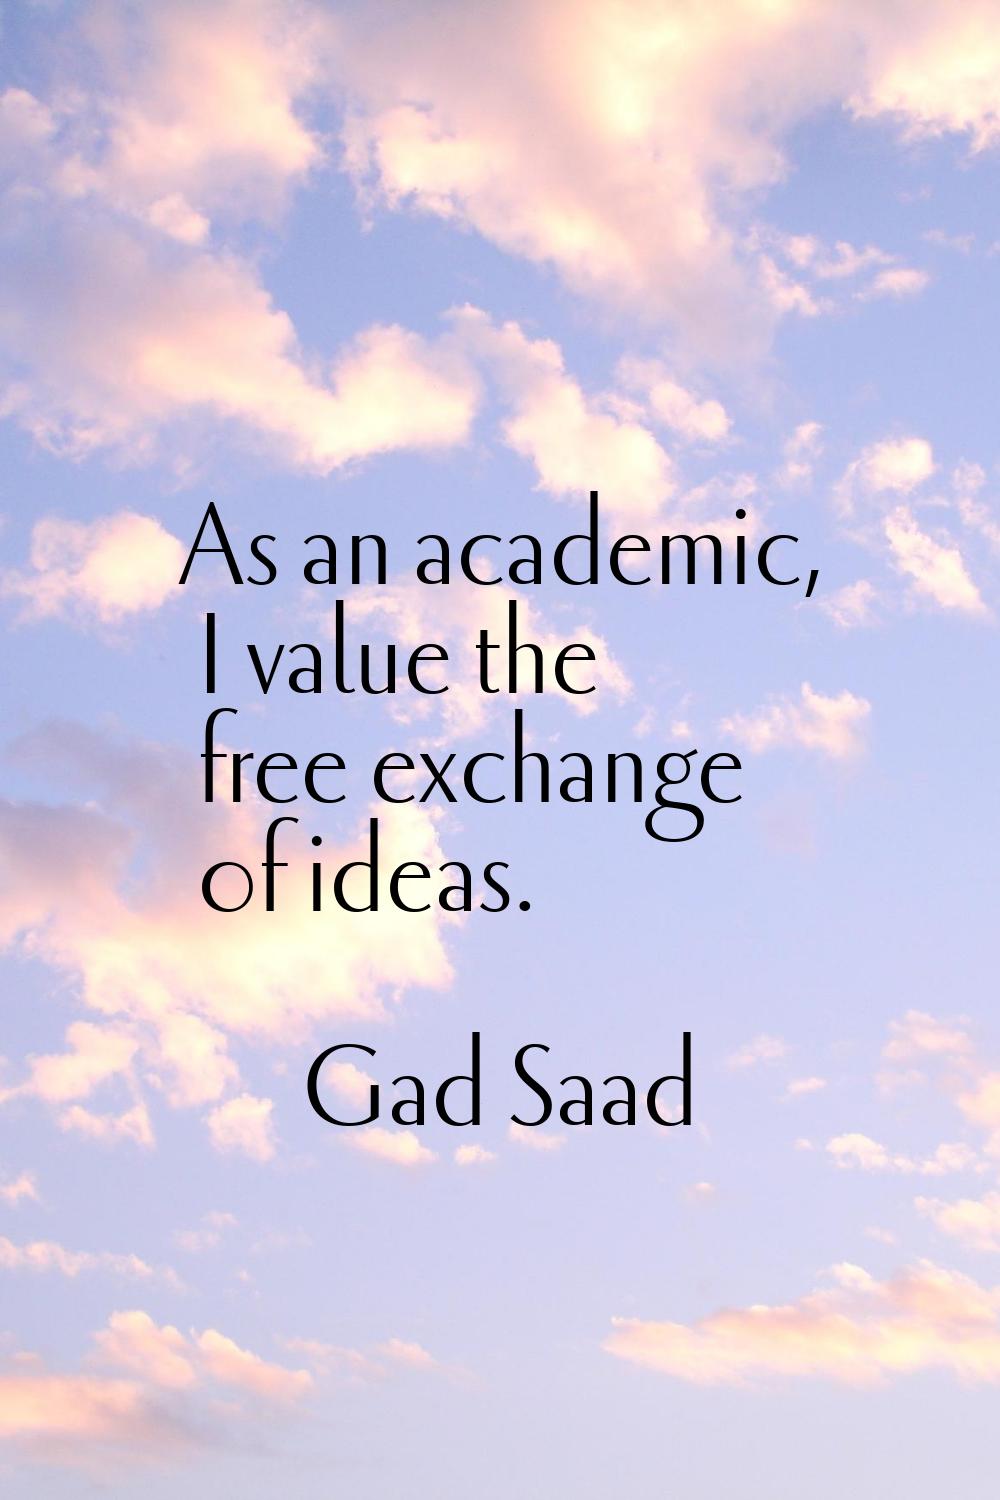 As an academic, I value the free exchange of ideas.